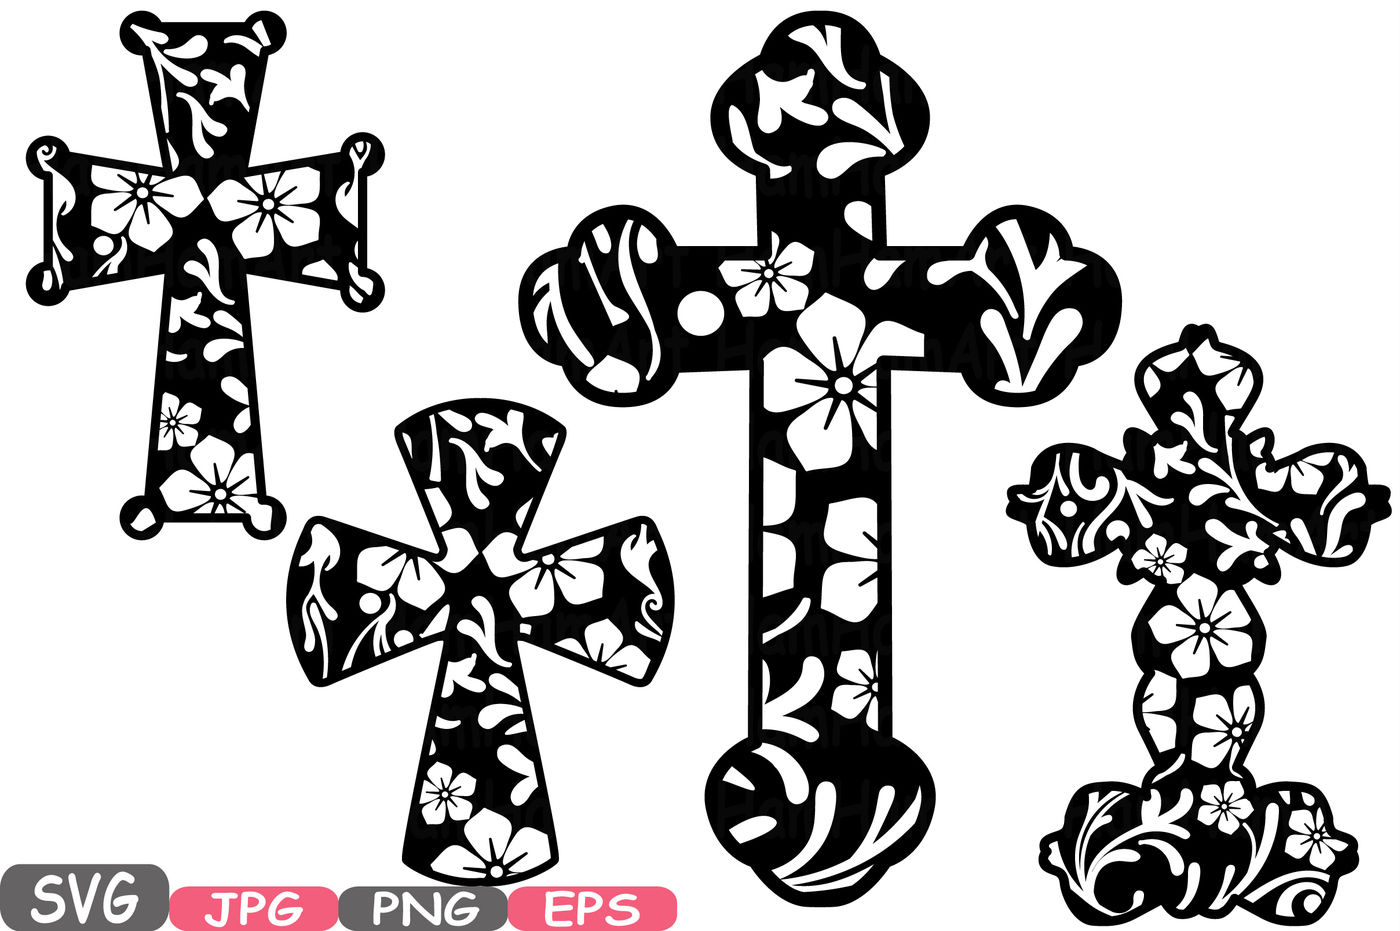 Download Svg Cross for Cricut, Silhouette, Brother Scan N Cut Cutting